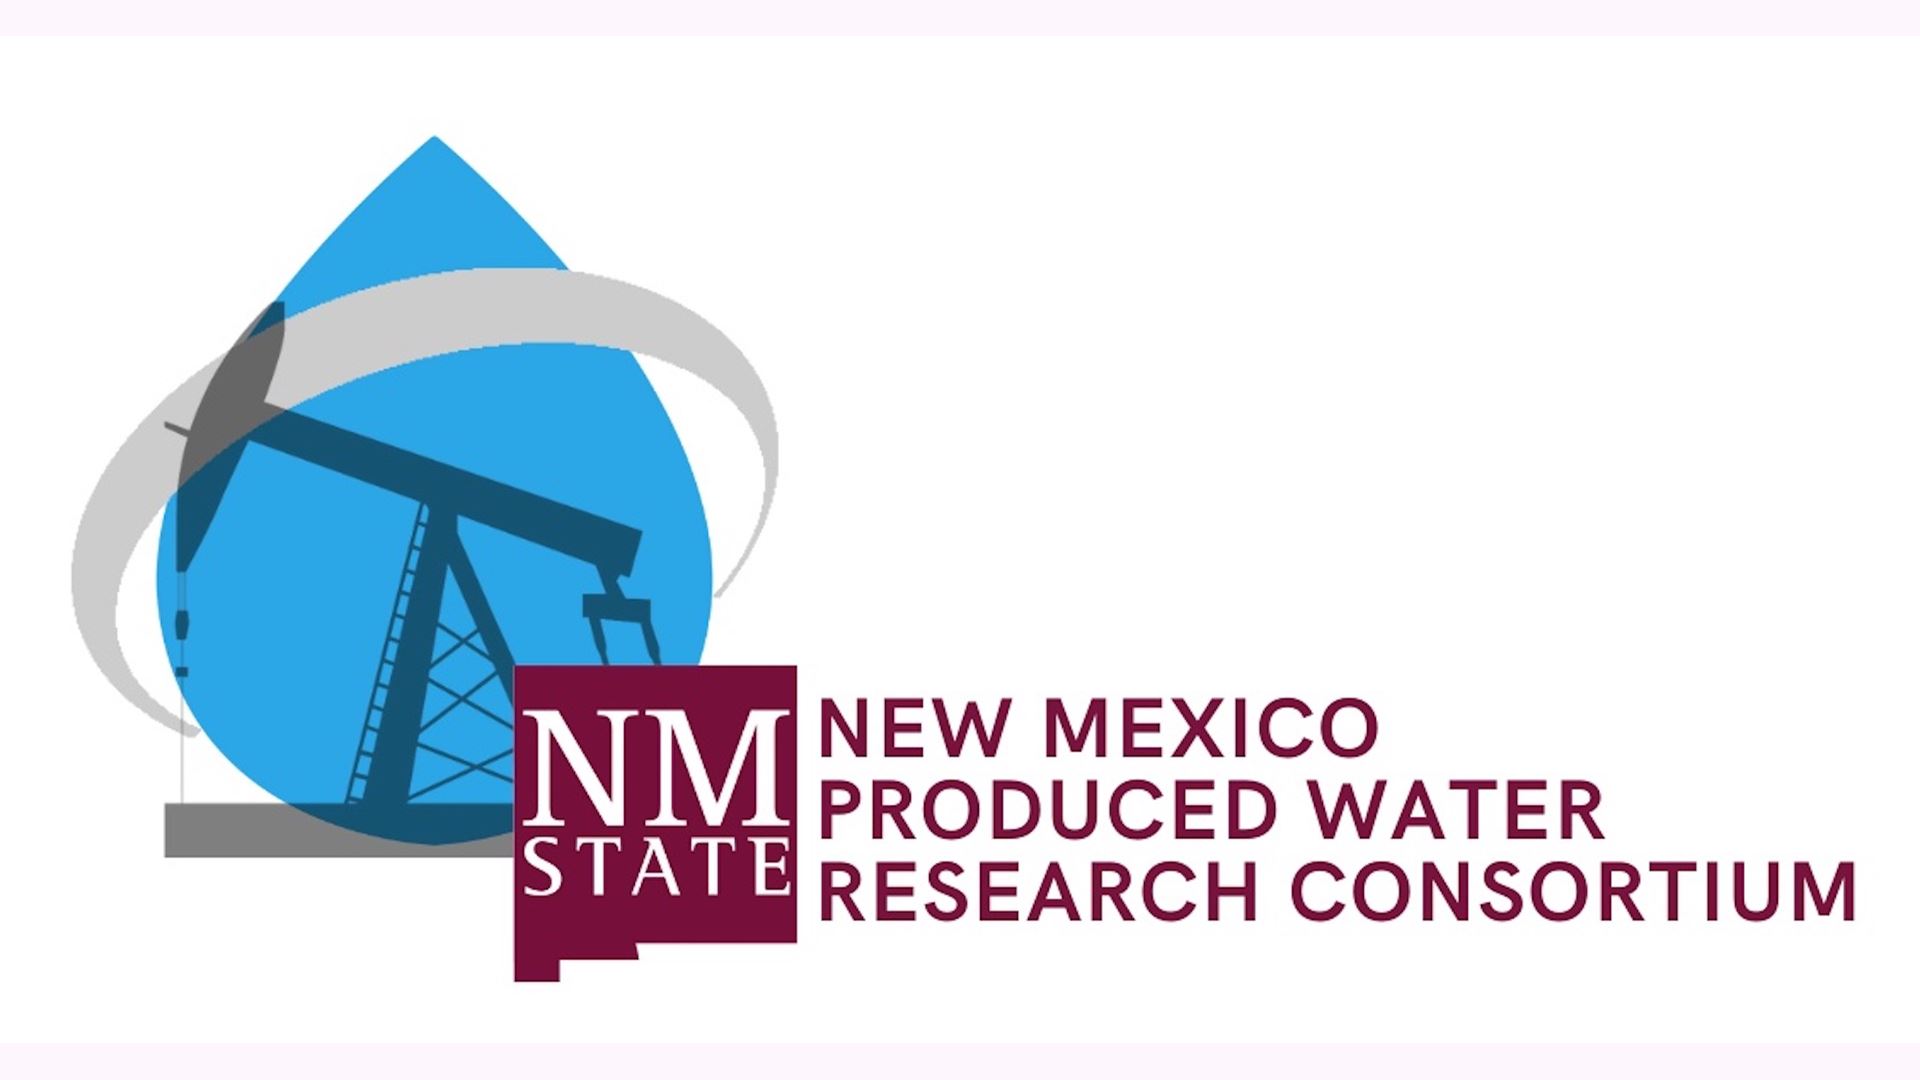 NM Produced Water Research Consortium at NMSU develops research plan for reuse of produced water